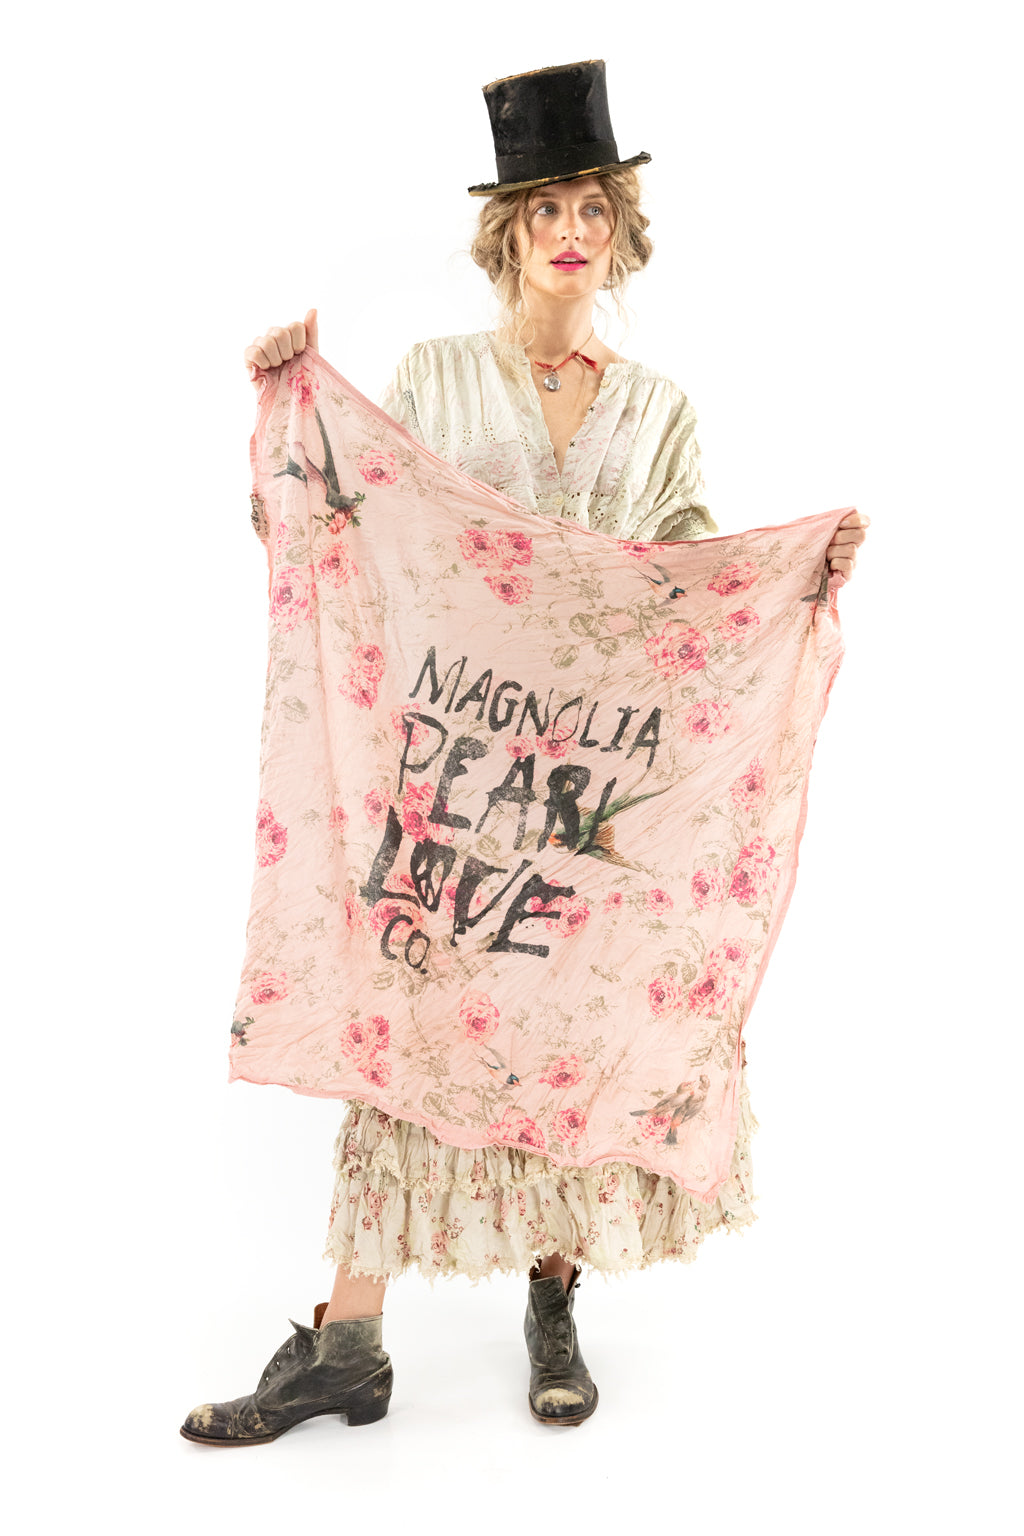 MP LOVE FLORAL BANDANA-SPARROWS - Kingfisher Road - Online Boutique